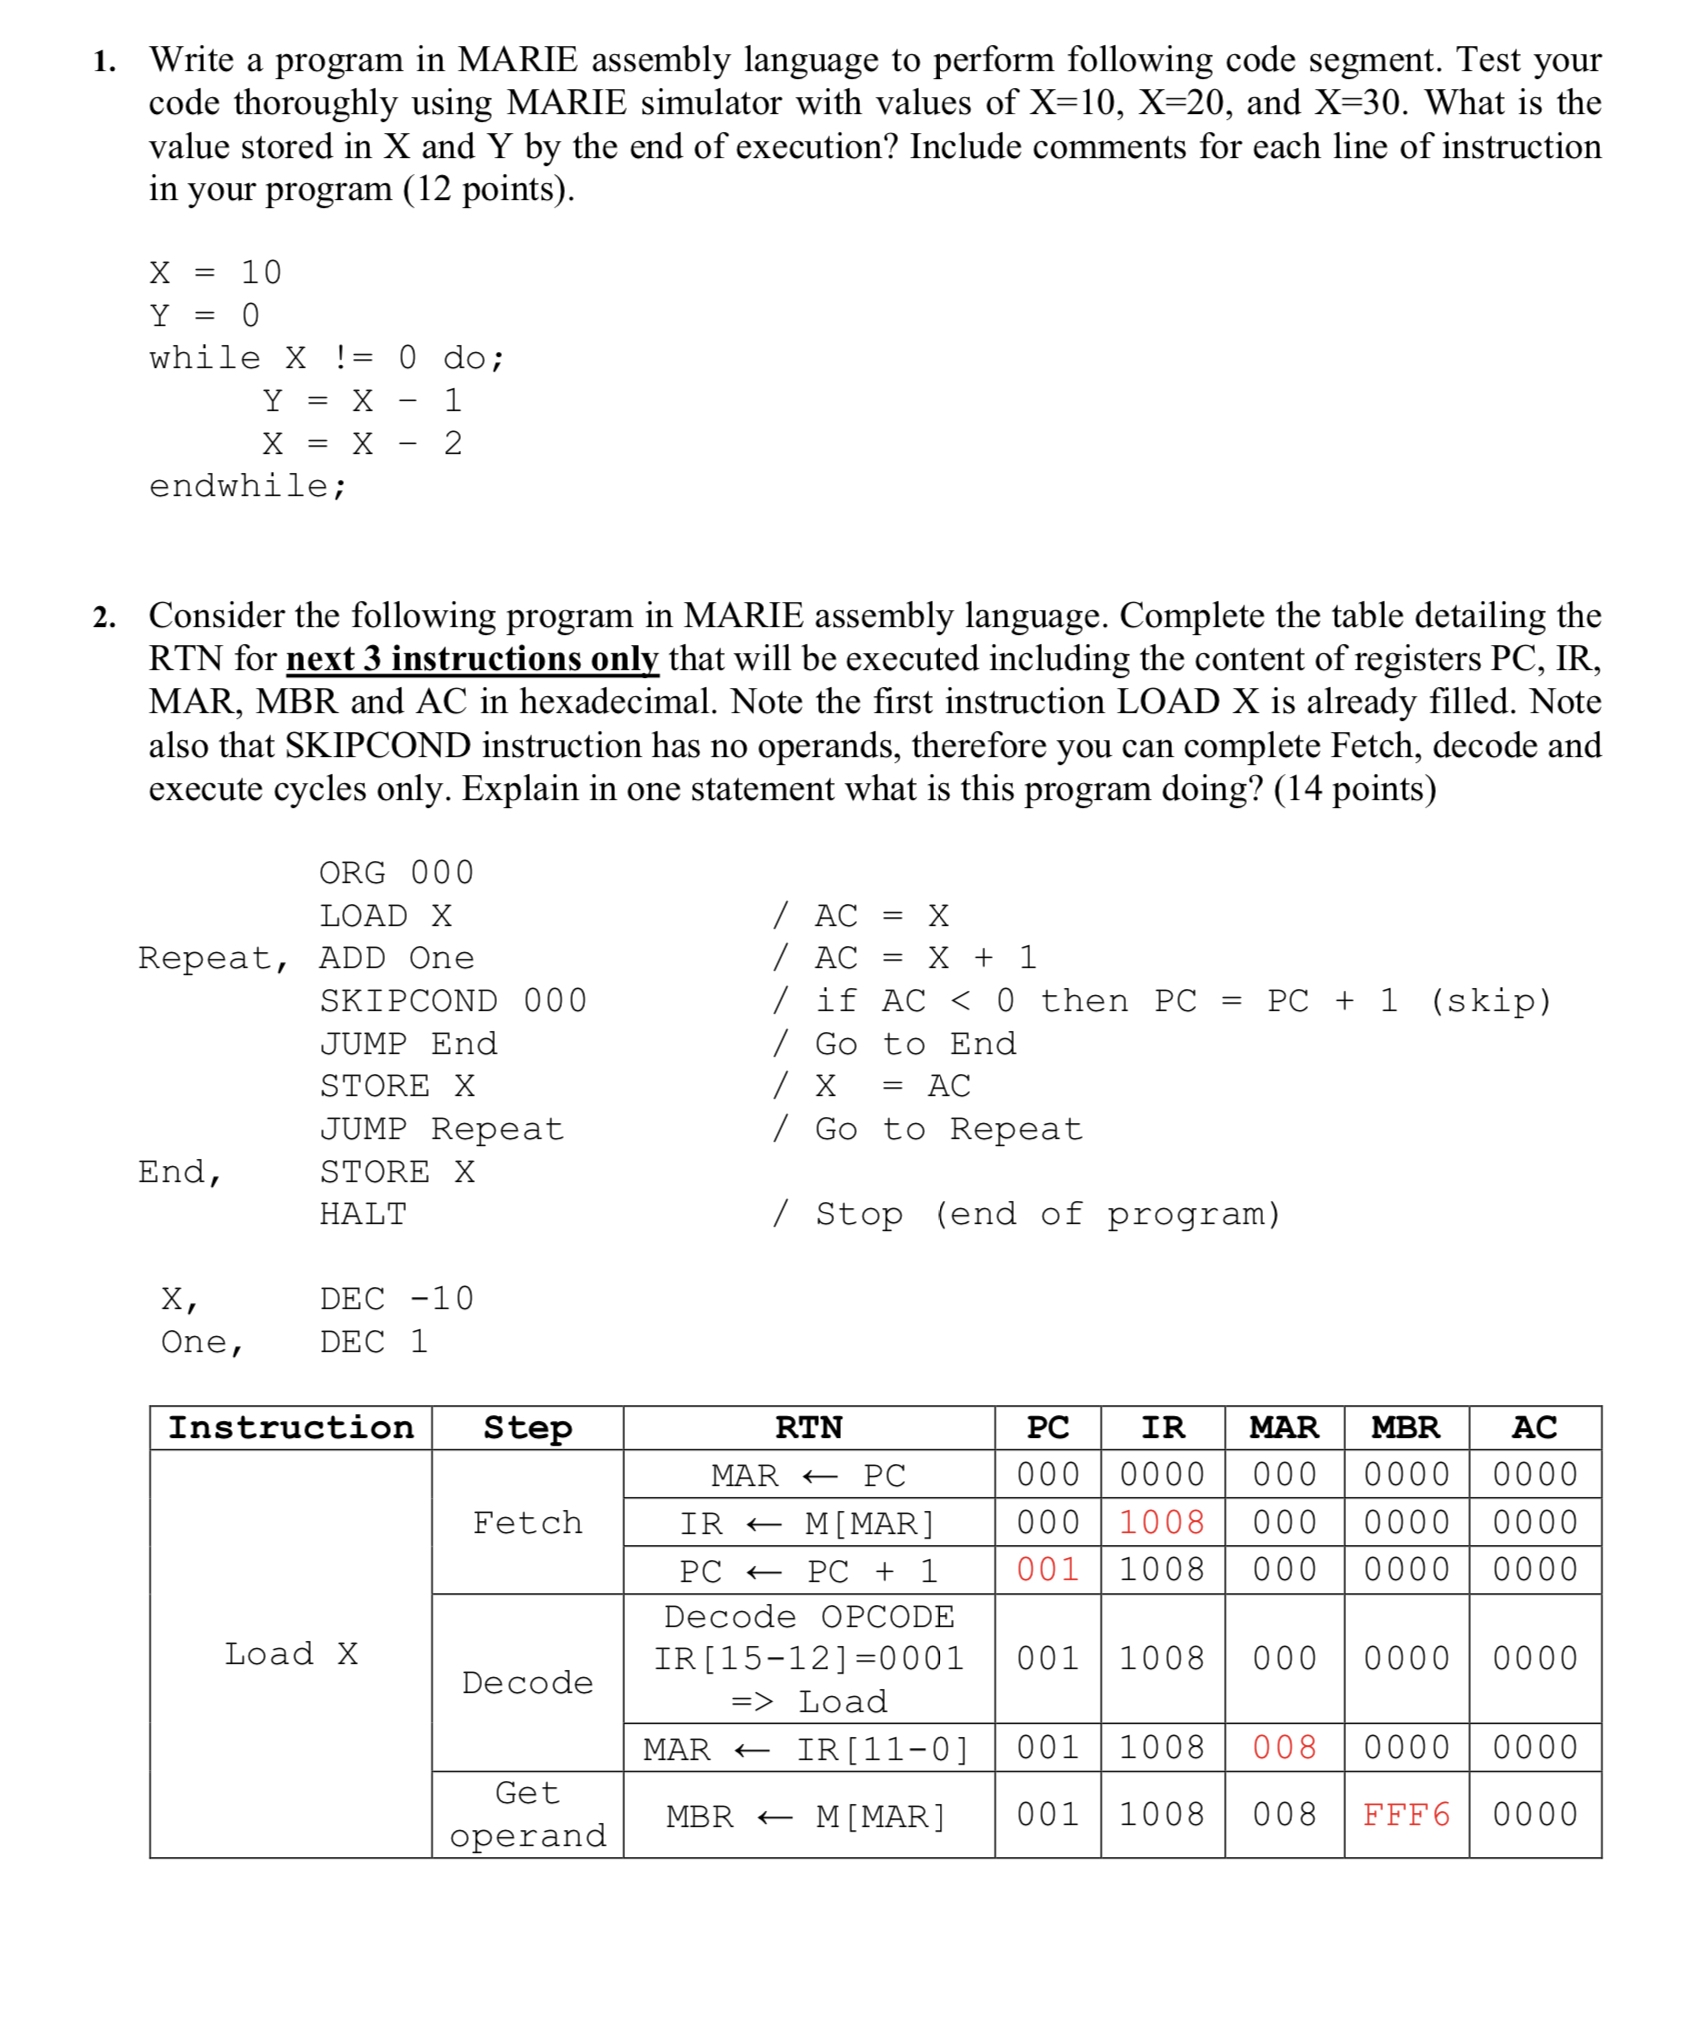 1. Write a program in MARIE assembly language to perform the following code segment. Test your code thoroughly using the MARIE simulator with values of X=10, X=20, and X=30. What is the value stored in X and Y by the end of execution? Include comments for each line of instruction in your program (12 points). X=10 Y=0 while X!=0 do Y=X X=X-1 endwhile while X!=0 do Y=X X=X-1 endwhile 2. Consider the following program in MARIE assembly language. Complete the table detailing the RTN for the next 3 instructions only that will be executed including the content of registers PC, IR, MAR, MBR, and AC in hexadecimal. Note the first instruction LOAD X is already filled. Note also that the SKIPCOND instruction has no operands, therefore you can complete Fetch, decode and execute cycles only. Explain in one statement what this program is doing (14 points). ORG 000 LOAD X ; AC = X Repeat, ADD One ; AC = X + 1 SKIPCOND 000 ; if AC < 0 then PC = PC + 1 (skip) JUMP End ; Go to End STORE X ; X = AC JUMP Repeat ; Go to Repeat End, STORE X ; Stop (end of program) This program is incrementing the value of X by 1 repeatedly until the value in AC becomes negative. 3. Assume a main memory has the following hex values in the first two bytes: Byte 0: 8F Byte 1: 0F What is the actual decimal value stored in these bytes, assuming they are in 16-bit 2's complement representation and the machine is using: a) Big endian memory b) Little endian memory (4 points) a) In big endian memory, the byte order is reversed. So, the actual decimal value stored in these bytes would be -7. b) In little endian memory, the byte order remains the same. So, the actual decimal value stored in these bytes would be 36655. 4. Consider the assembly program (in MARIE) below and the corresponding memory address for each instruction. Show the symbol table that will be constructed by the assembler after the first pass including the translated program, then fill in the final machine code produced by the assembler after the second pass. Fill in the given tables using HEX numbers for instructions and addresses. (10 points) [Symbol Table] LOAD 0100 ADD 0101 STORE 0110 SUBT 0111 JUMP 1000 Dec1 0001 [First Pass] 0100 LOAD X ; Load value at address X to AC 0101 ADD Y ; Add value at address Y to AC 0110 STORE Z ; Store value in AC to address Z 0111 SUBT X ; Subtract value at address X from AC 1000 JUMP Z ; Jump to address Z [Second Pass] 0100 1005 ; Load X 0101 5006 ; Add Y 0110 210B ; Store Z 0111 1015 ; Subtract X 1000 4010 ; Jump Z